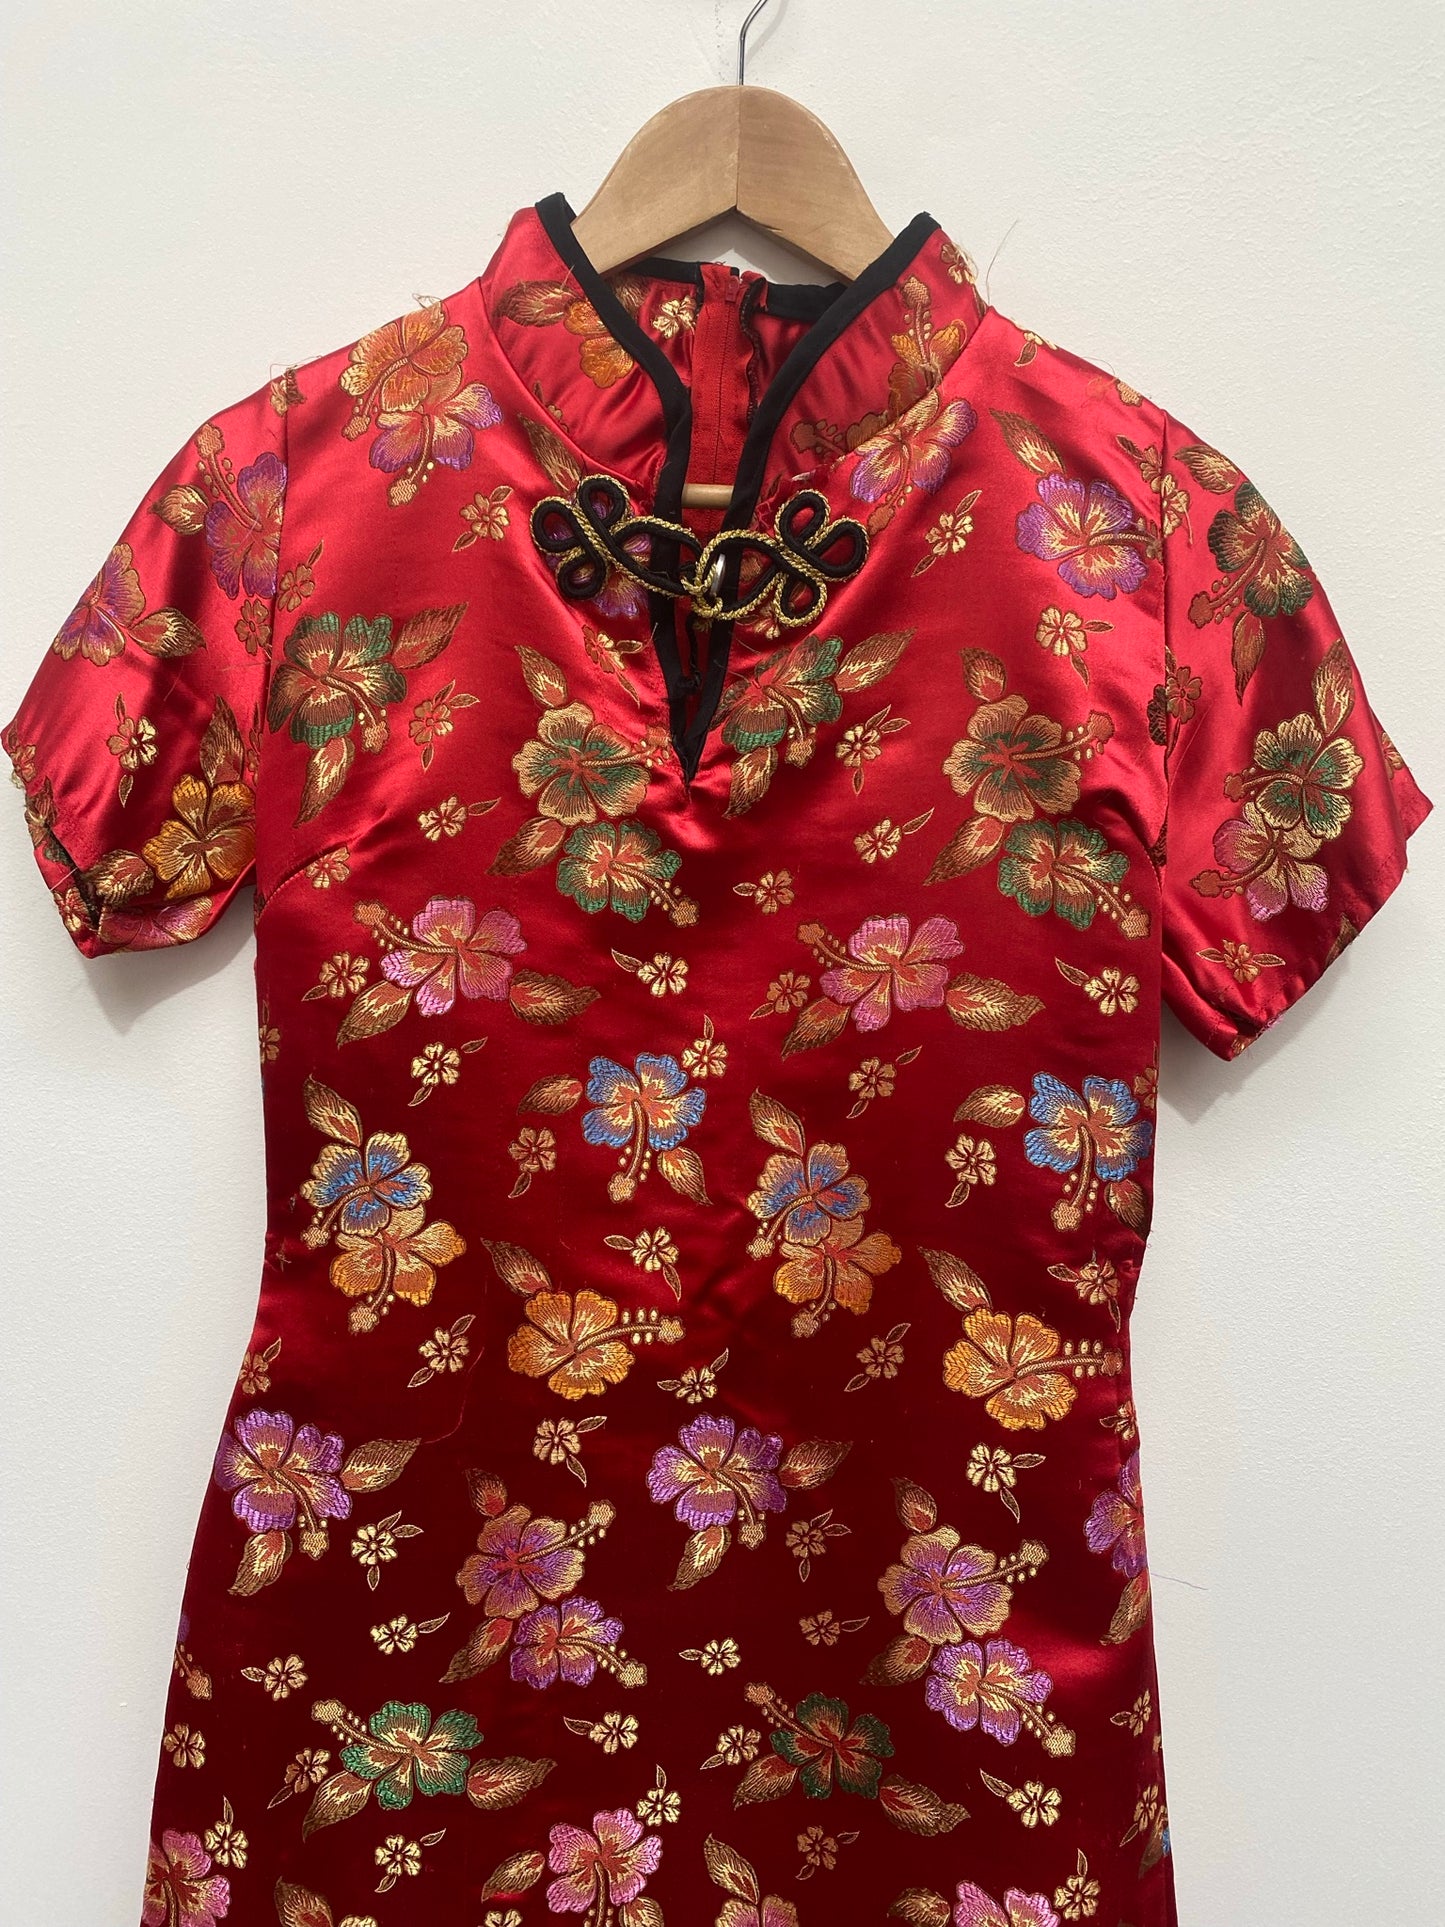 Ladies Vintage Chinese Cheongsam style Red Dress - Traditional Costumes & Clothing